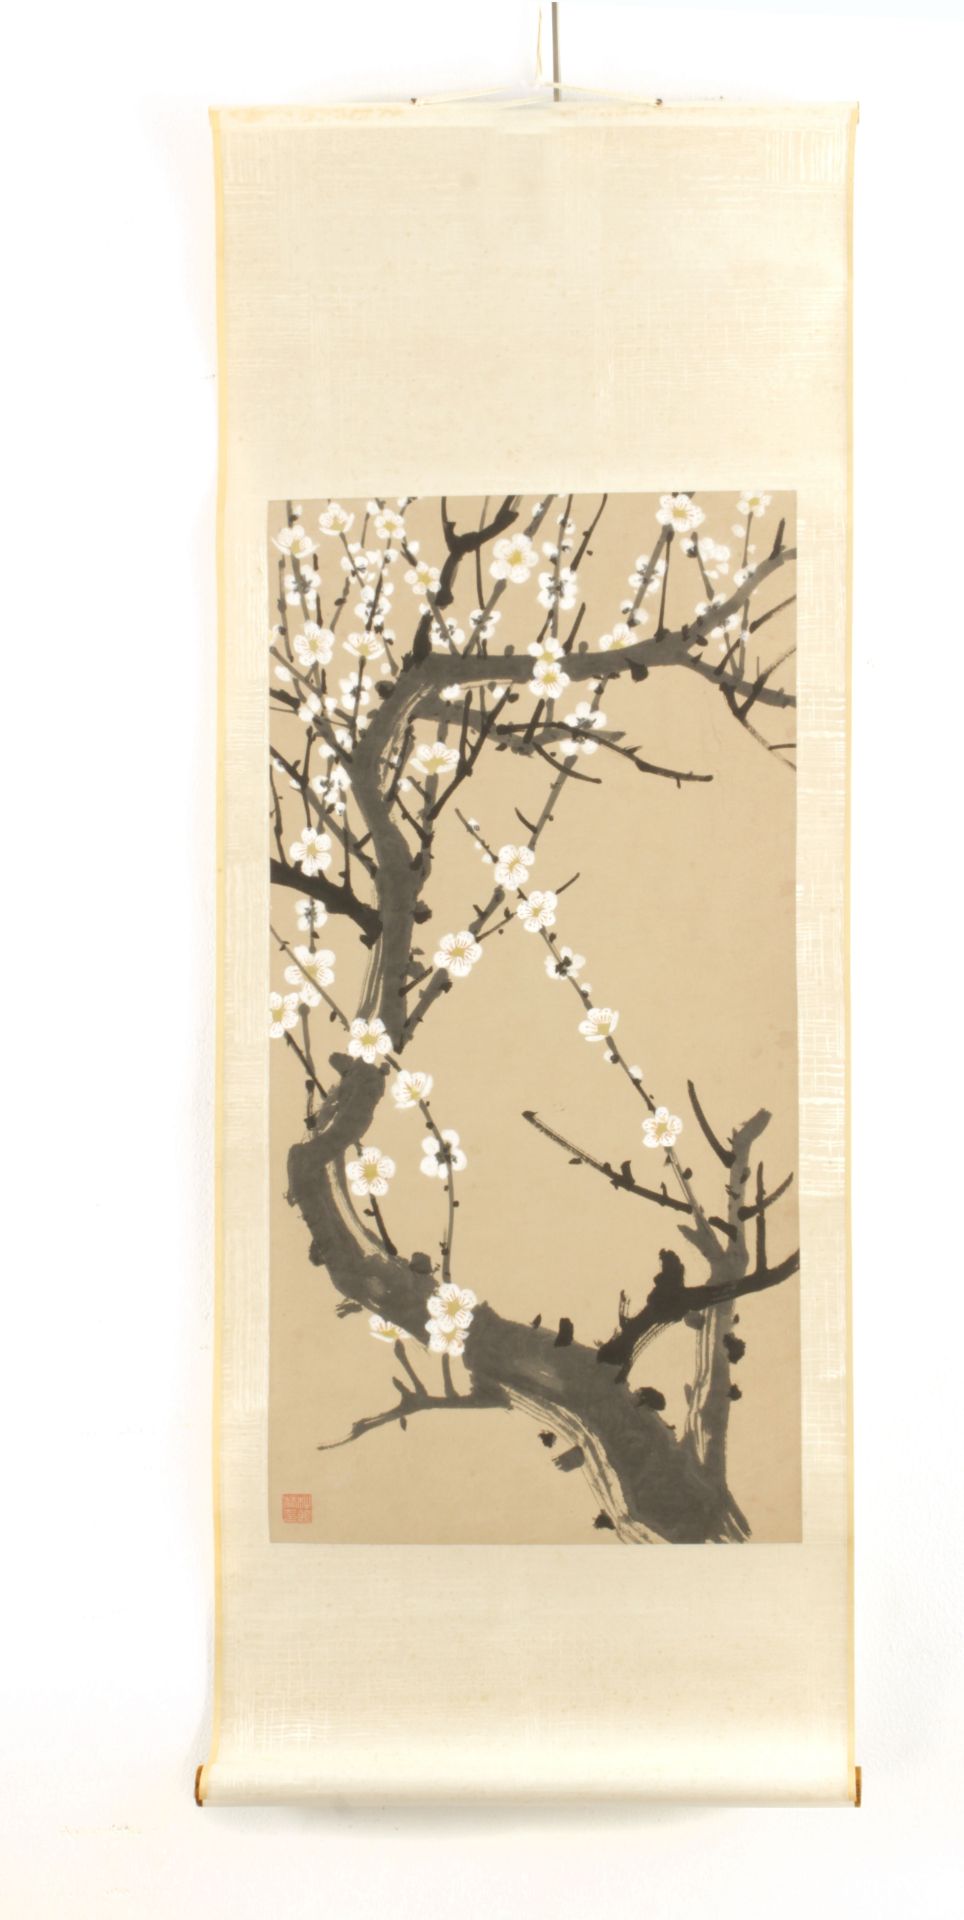 A 20th century Chinese scroll depicting white plum blossom